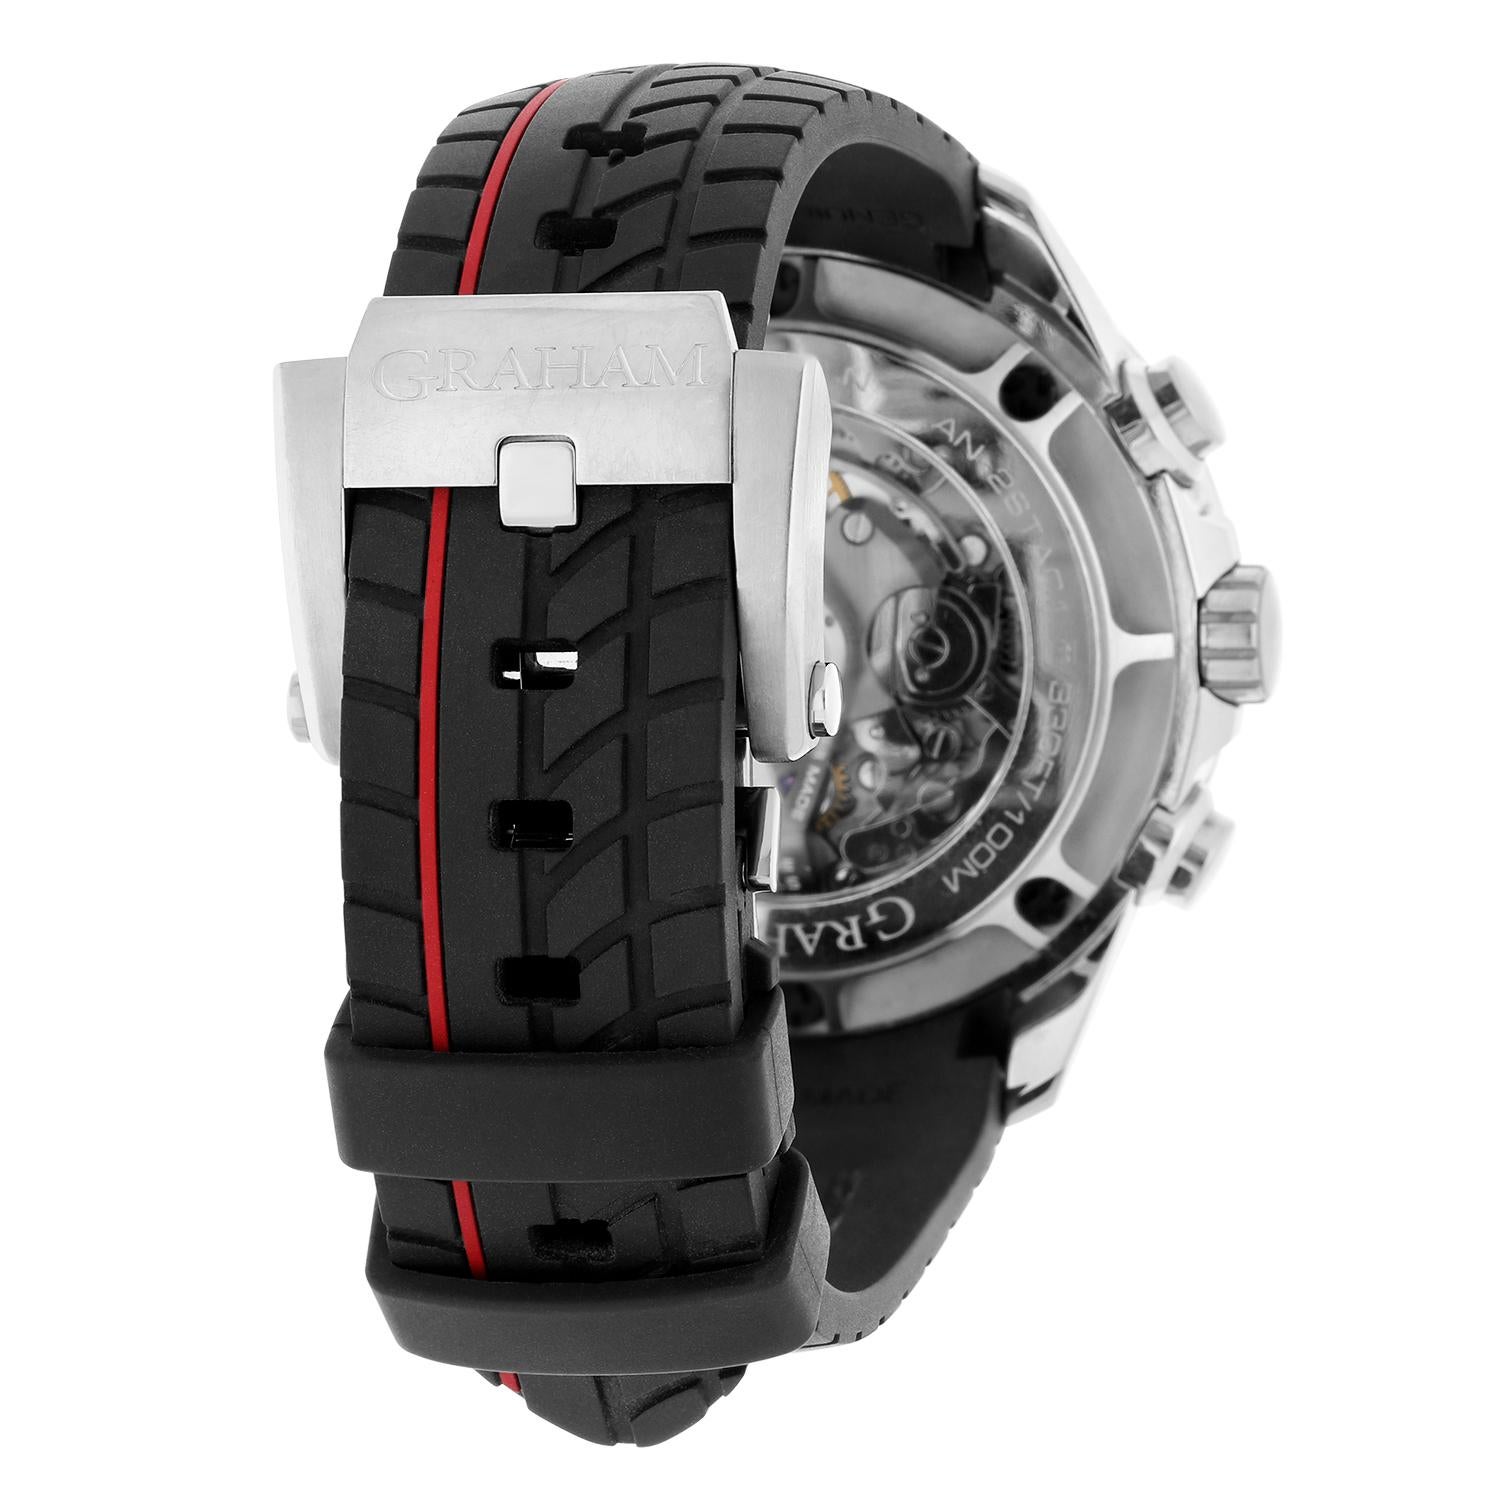 Graham Silverstone RS Skeleton Red Automatic Men's Limited Edition Watch 5